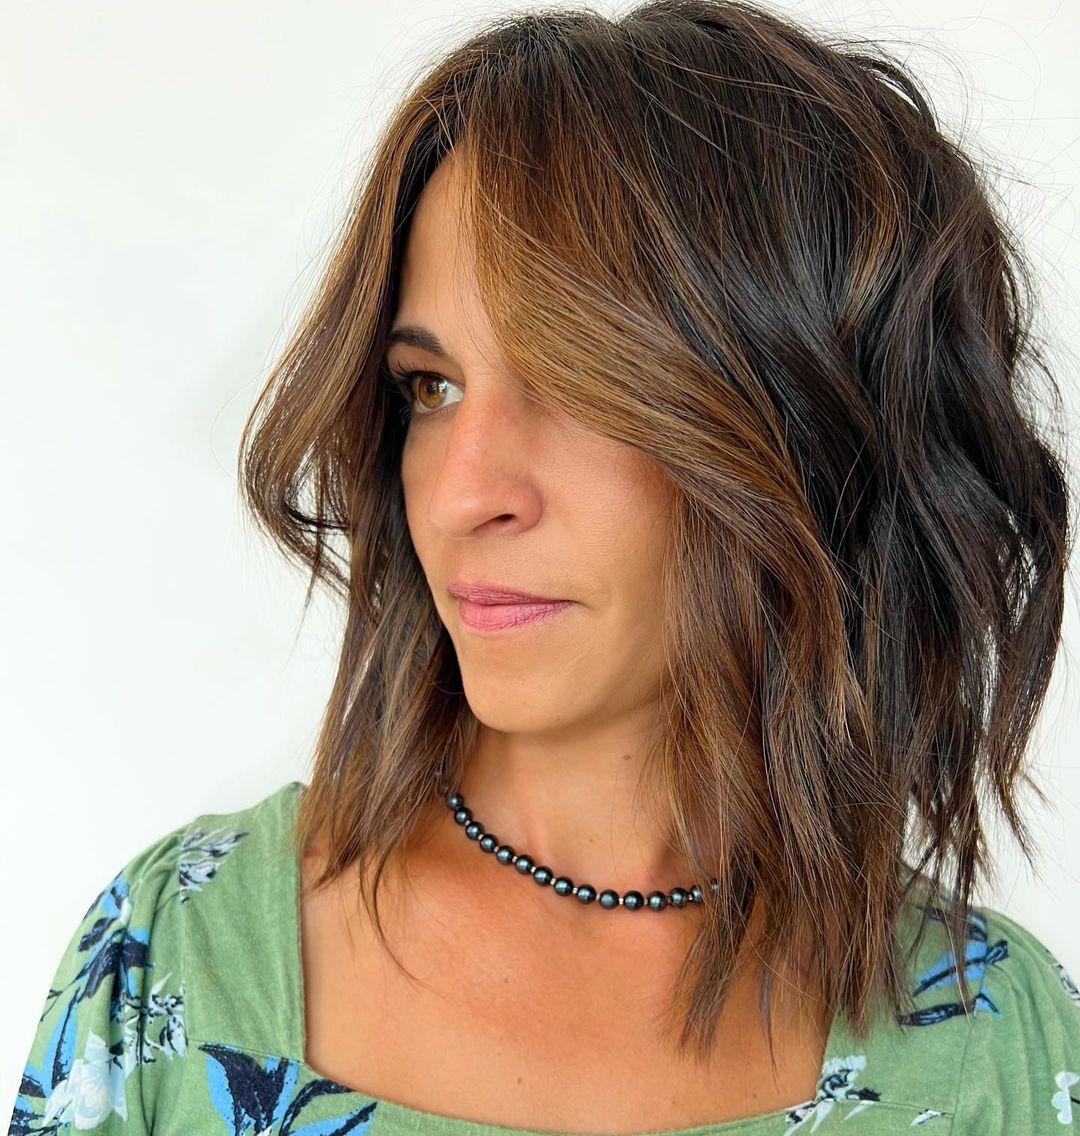 Bangs on two sides: 20 chic ways to add spice and charm to the image